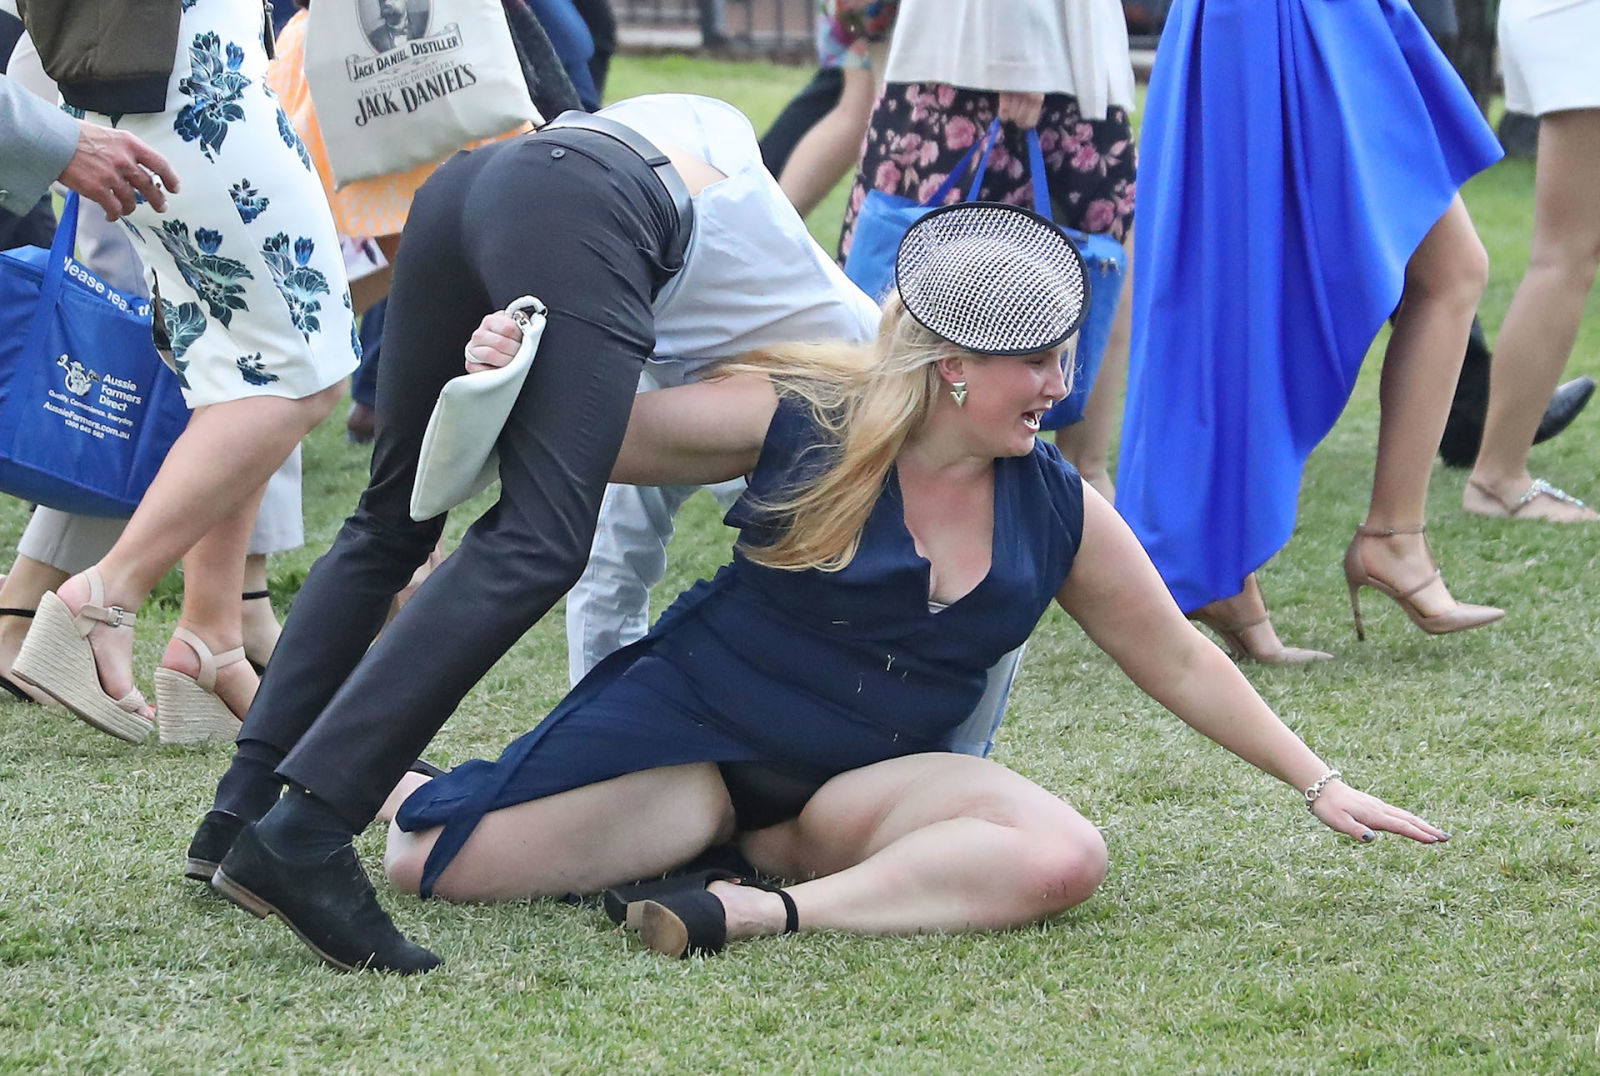 funny awkward embarrassing moments caught on camera Melbourne Cup 2016.